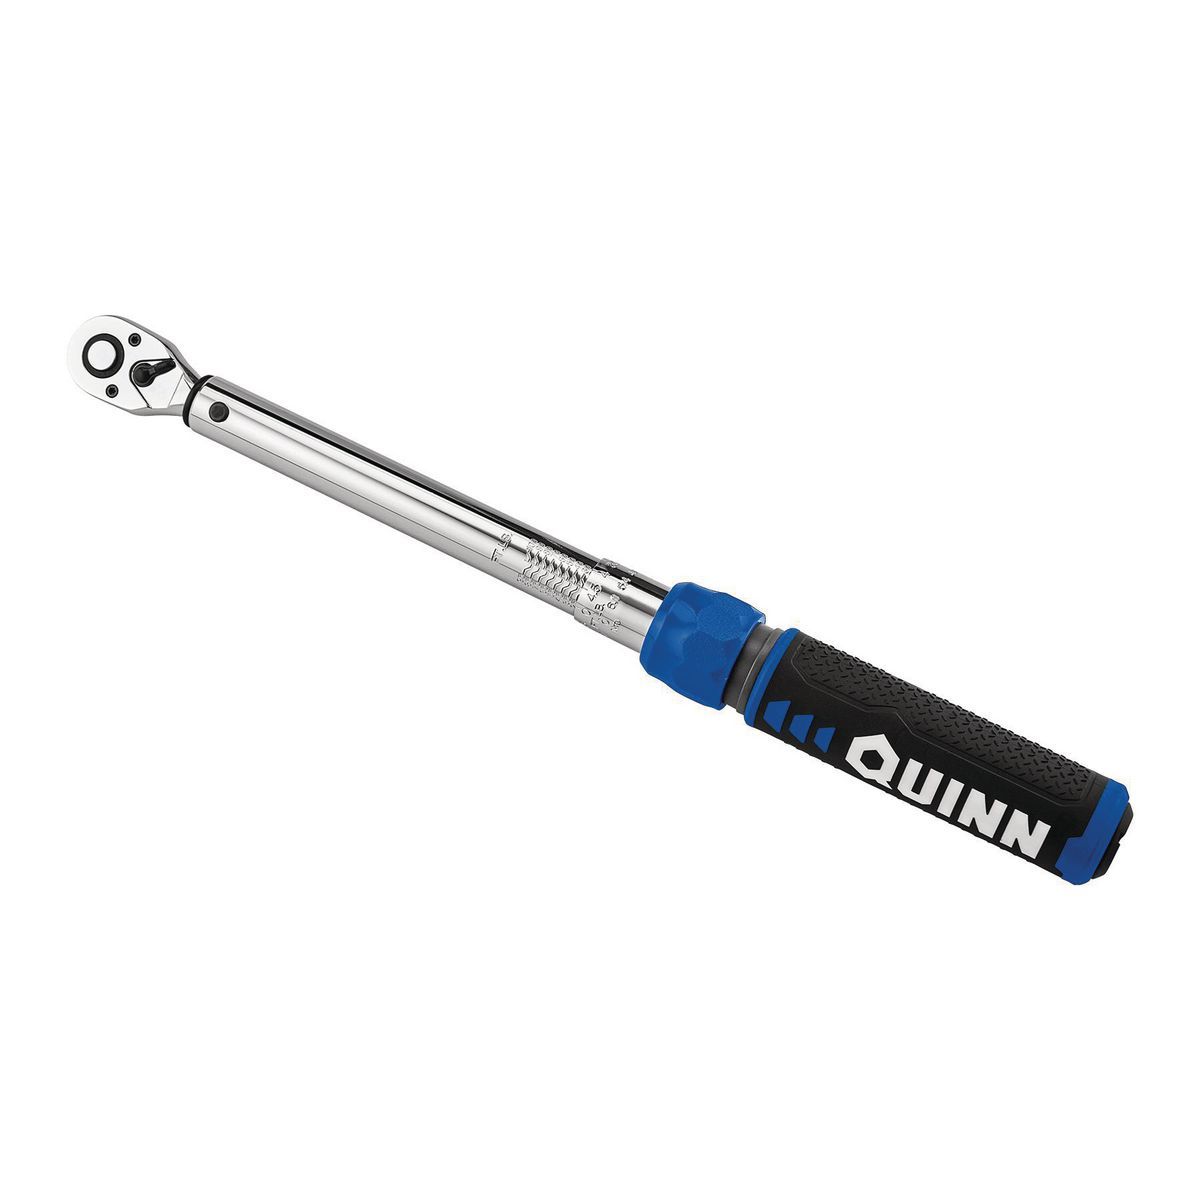 QUINN 3/8 in. Drive 20 to 100 ft. lbs. Click Torque Wrench